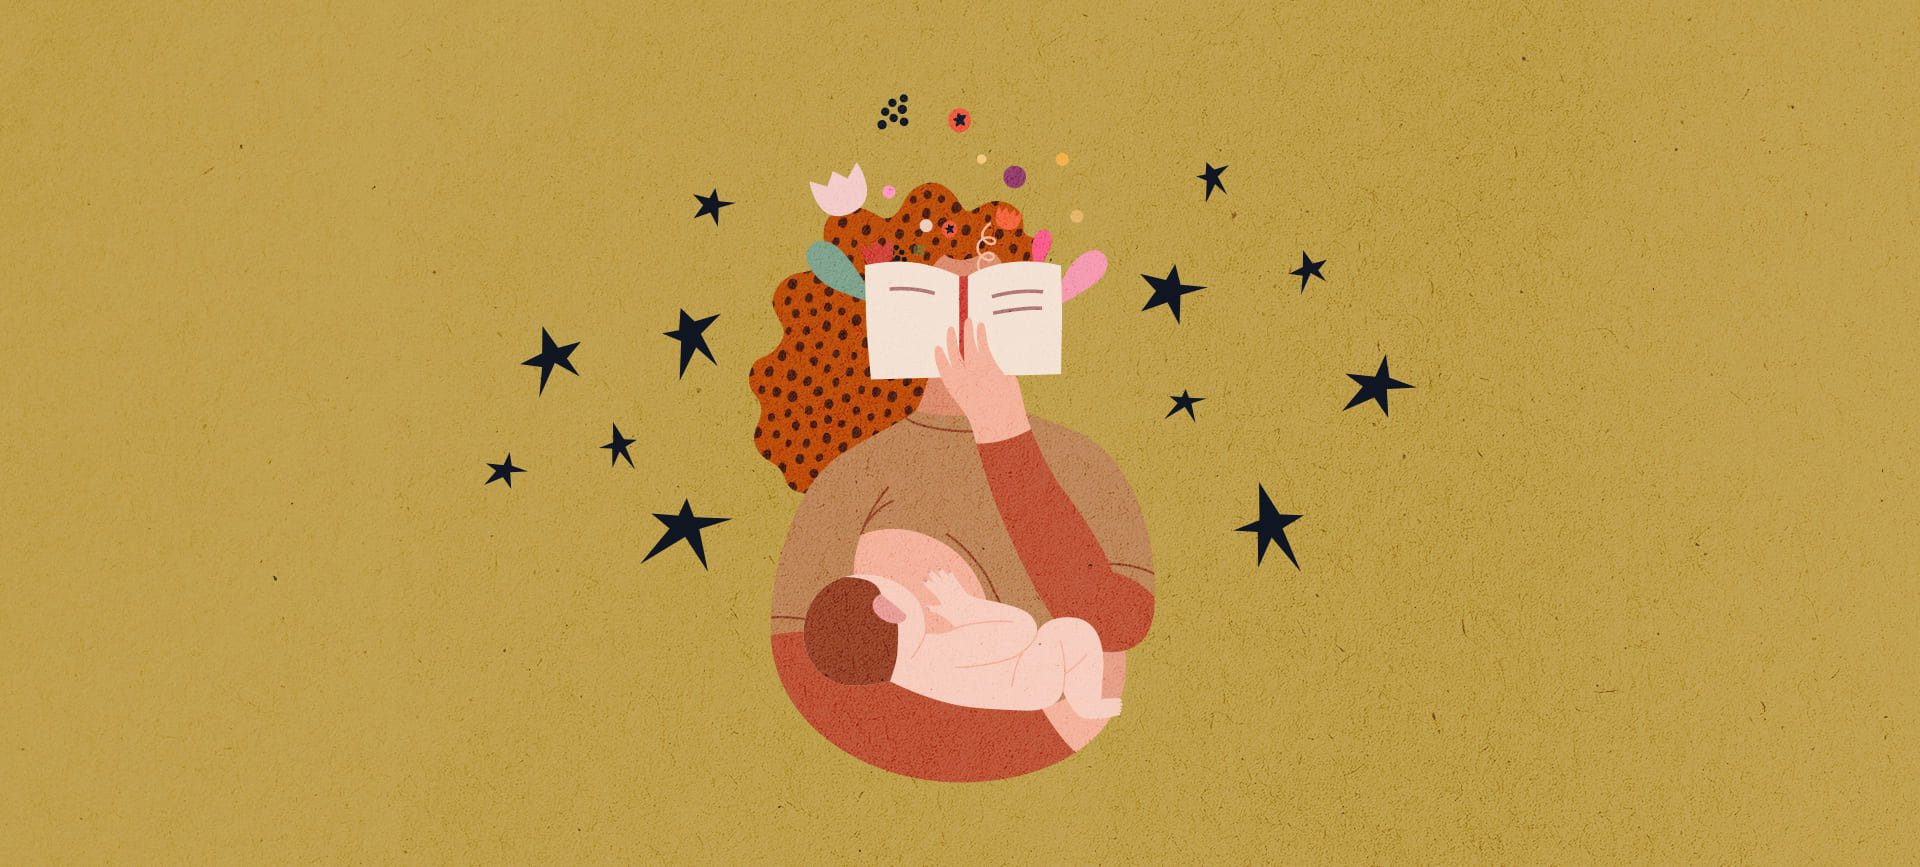 A woman breastfeeds her newborn with one hand while reading a book in her other hand.